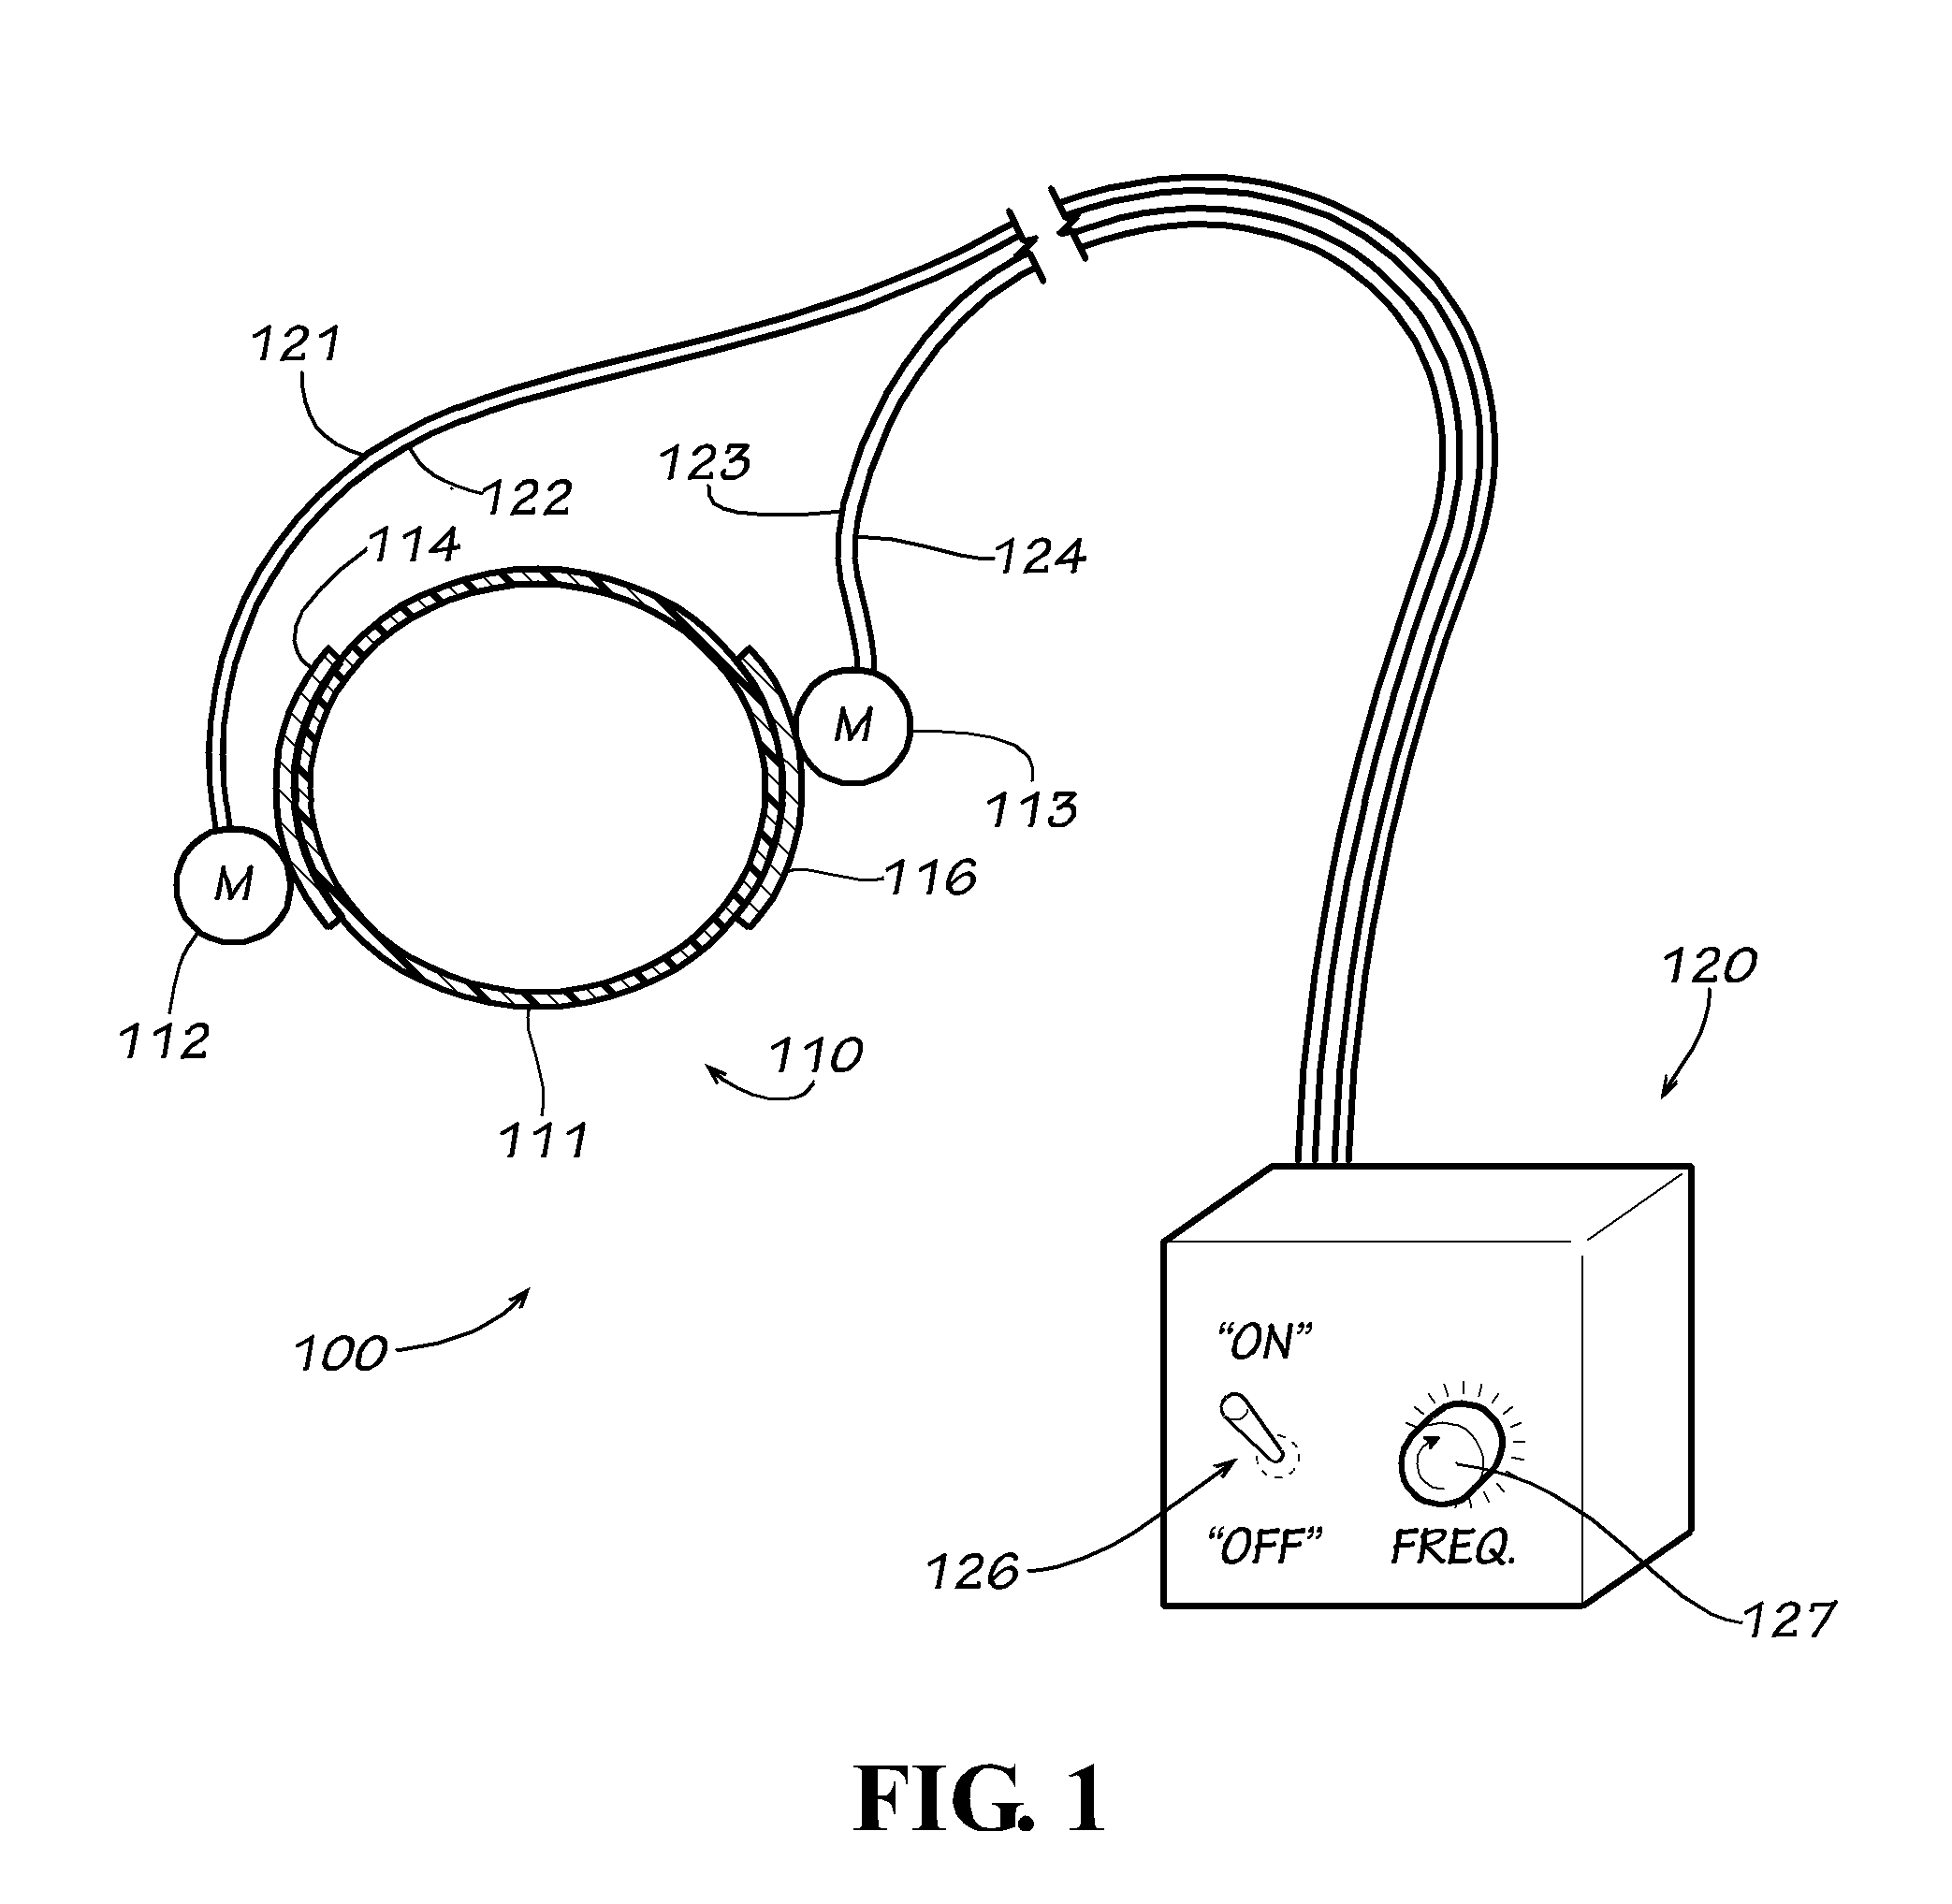 Method and apparatus for reducing/suppressing pain in digits